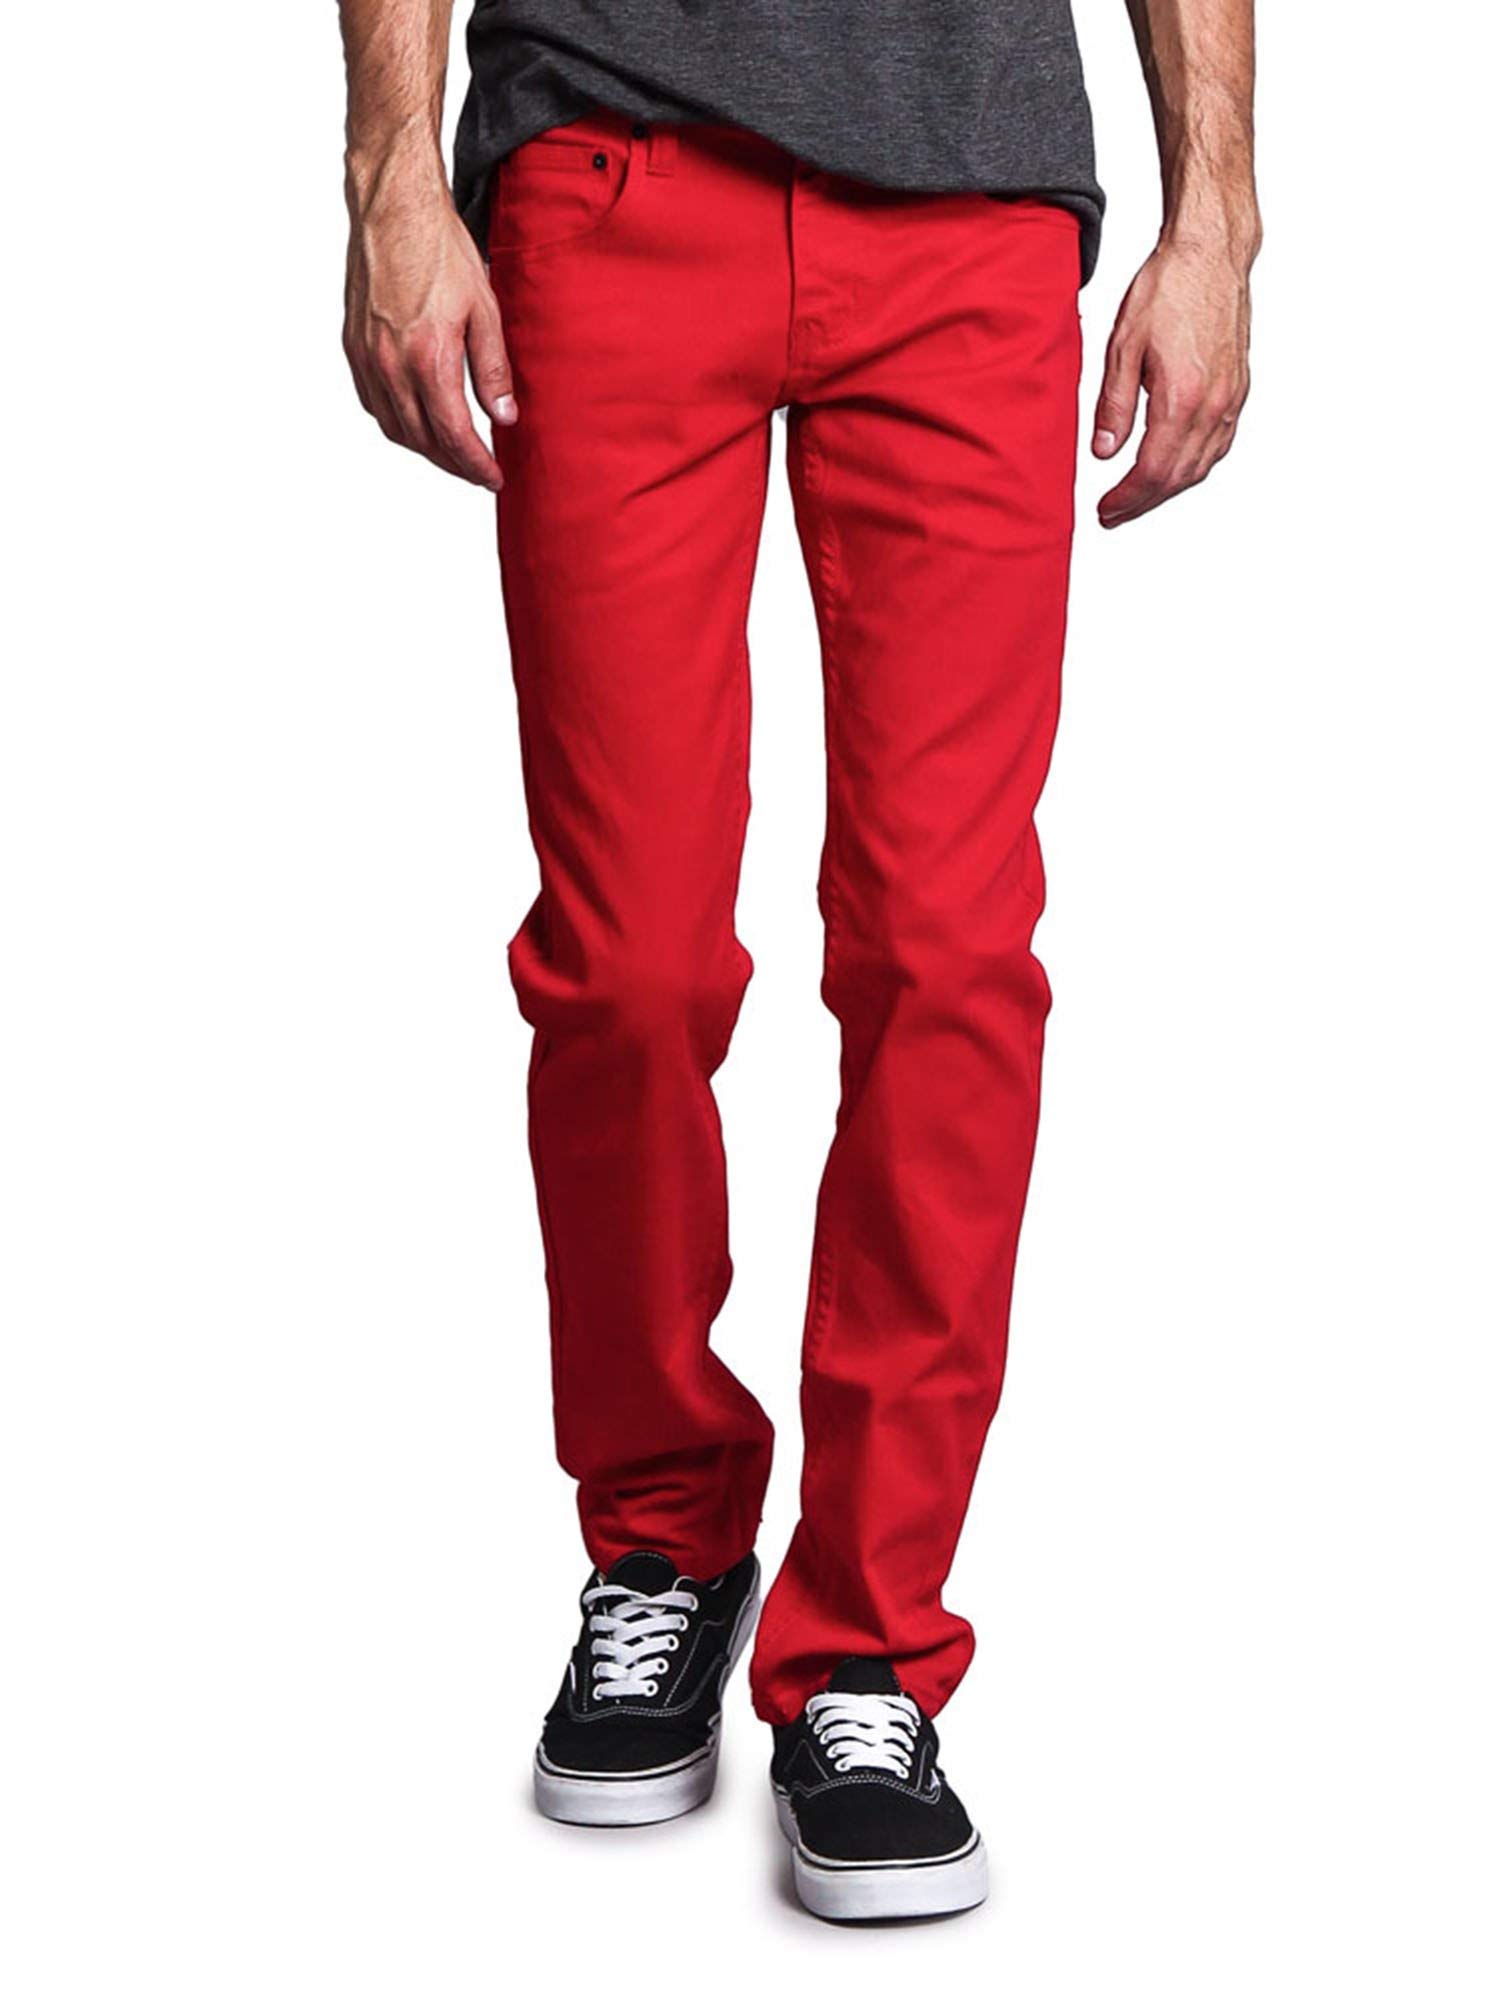 Victorious Men's Skinny Fit Color Stretch Jeans